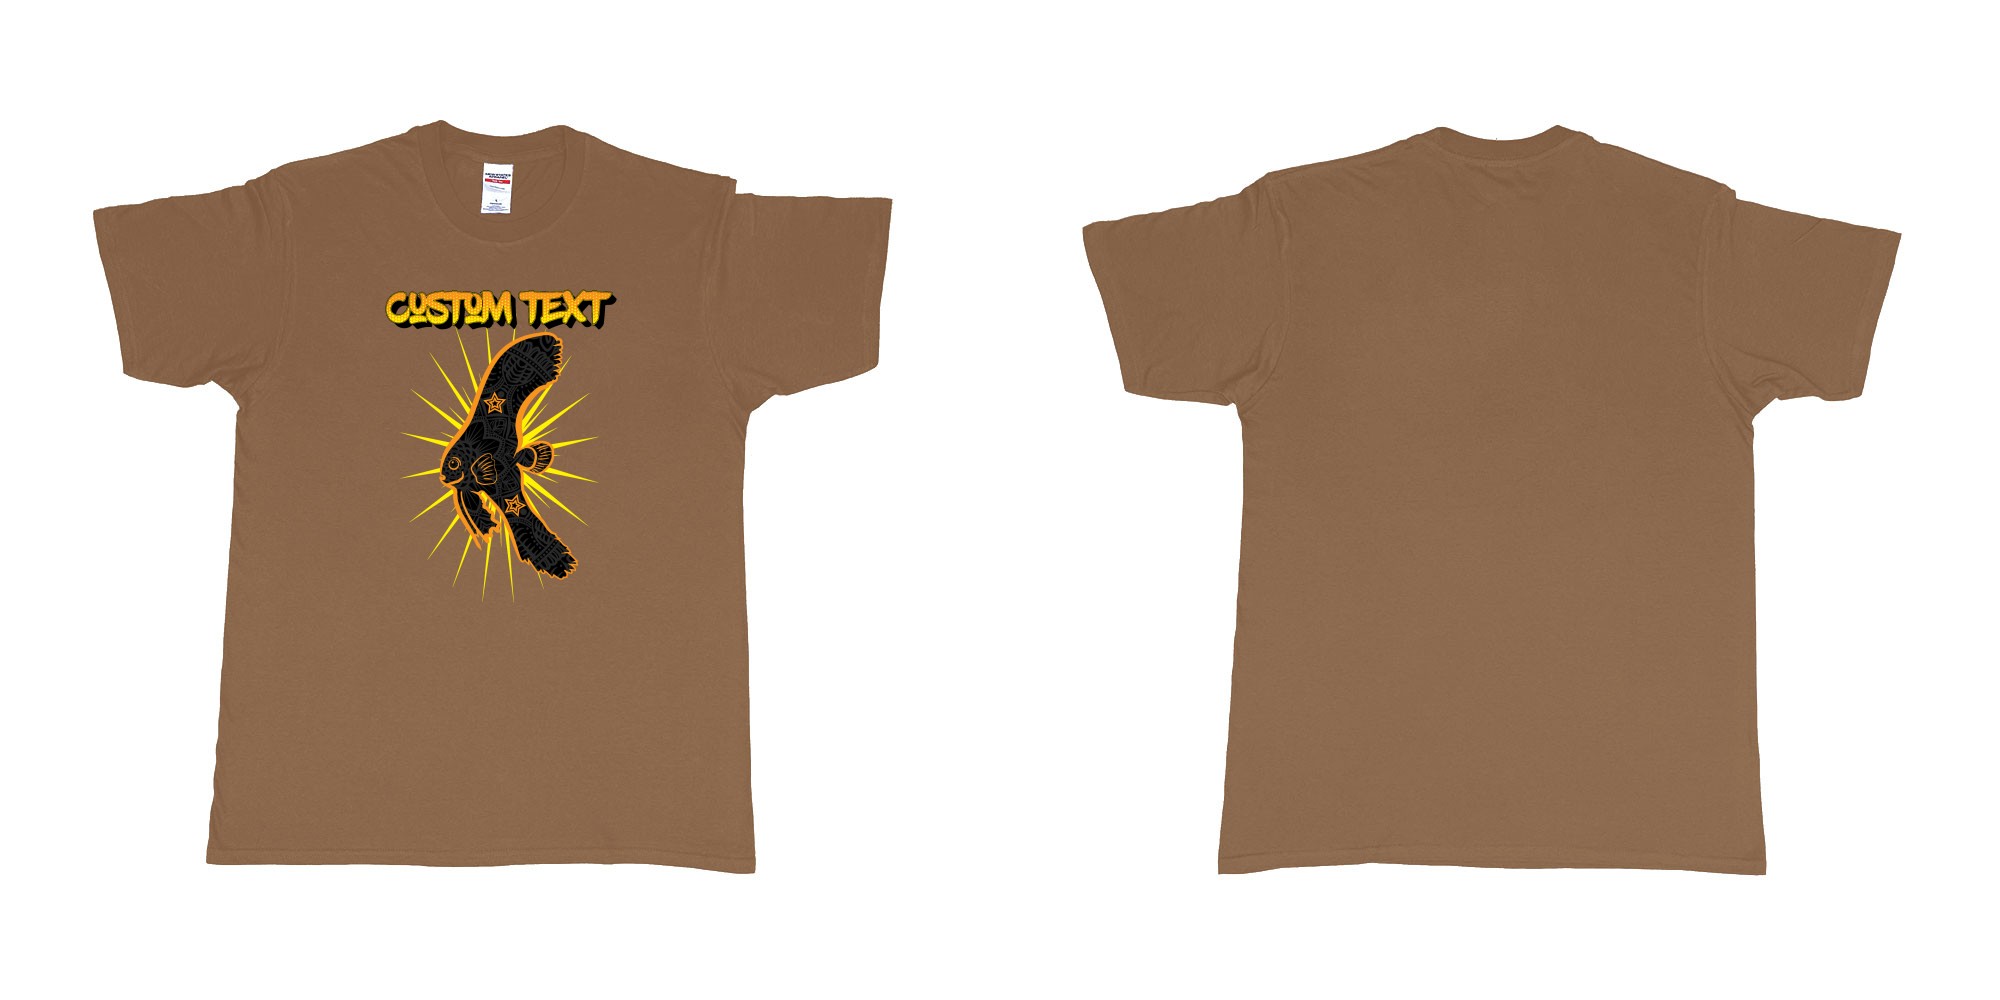 Custom tshirt design batfish juvenile star own text in fabric color chestnut choice your own text made in Bali by The Pirate Way